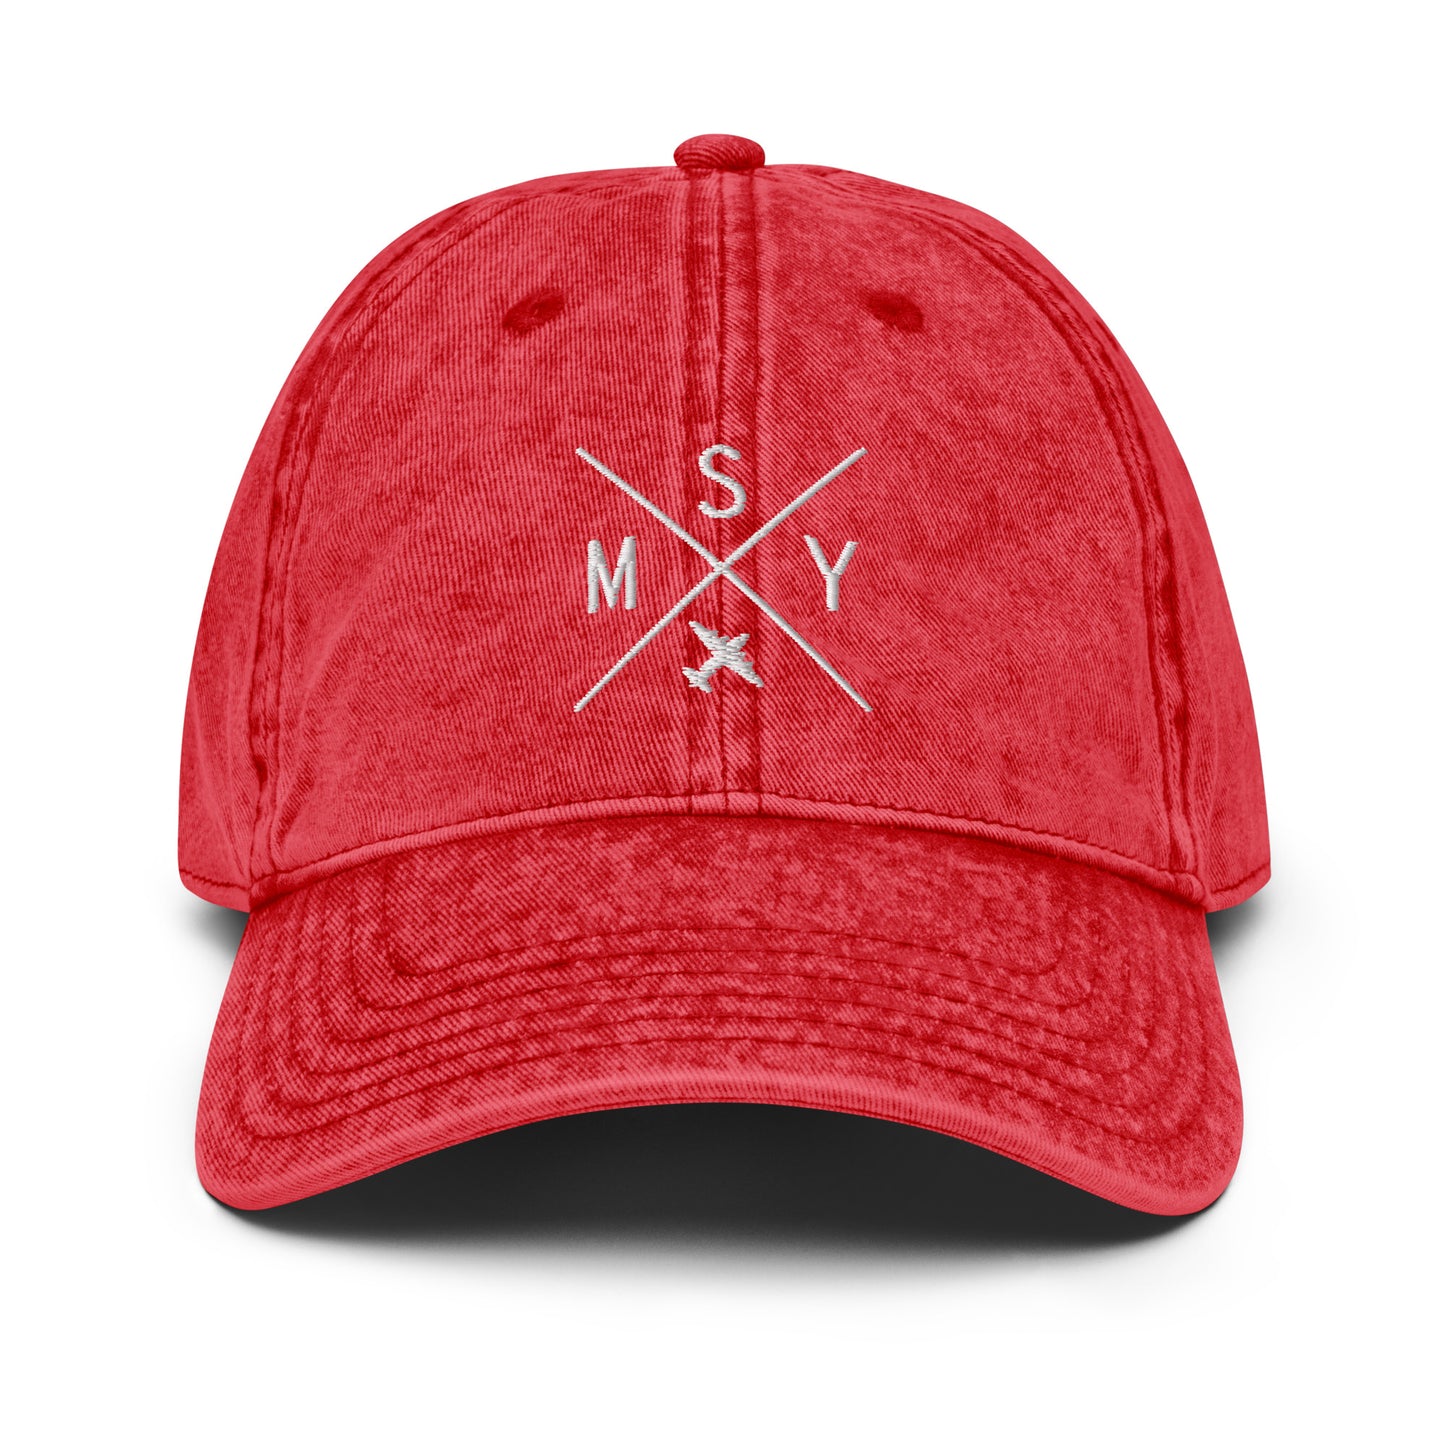 Crossed-X Cotton Twill Cap - White • MSY New Orleans • YHM Designs - Image 25